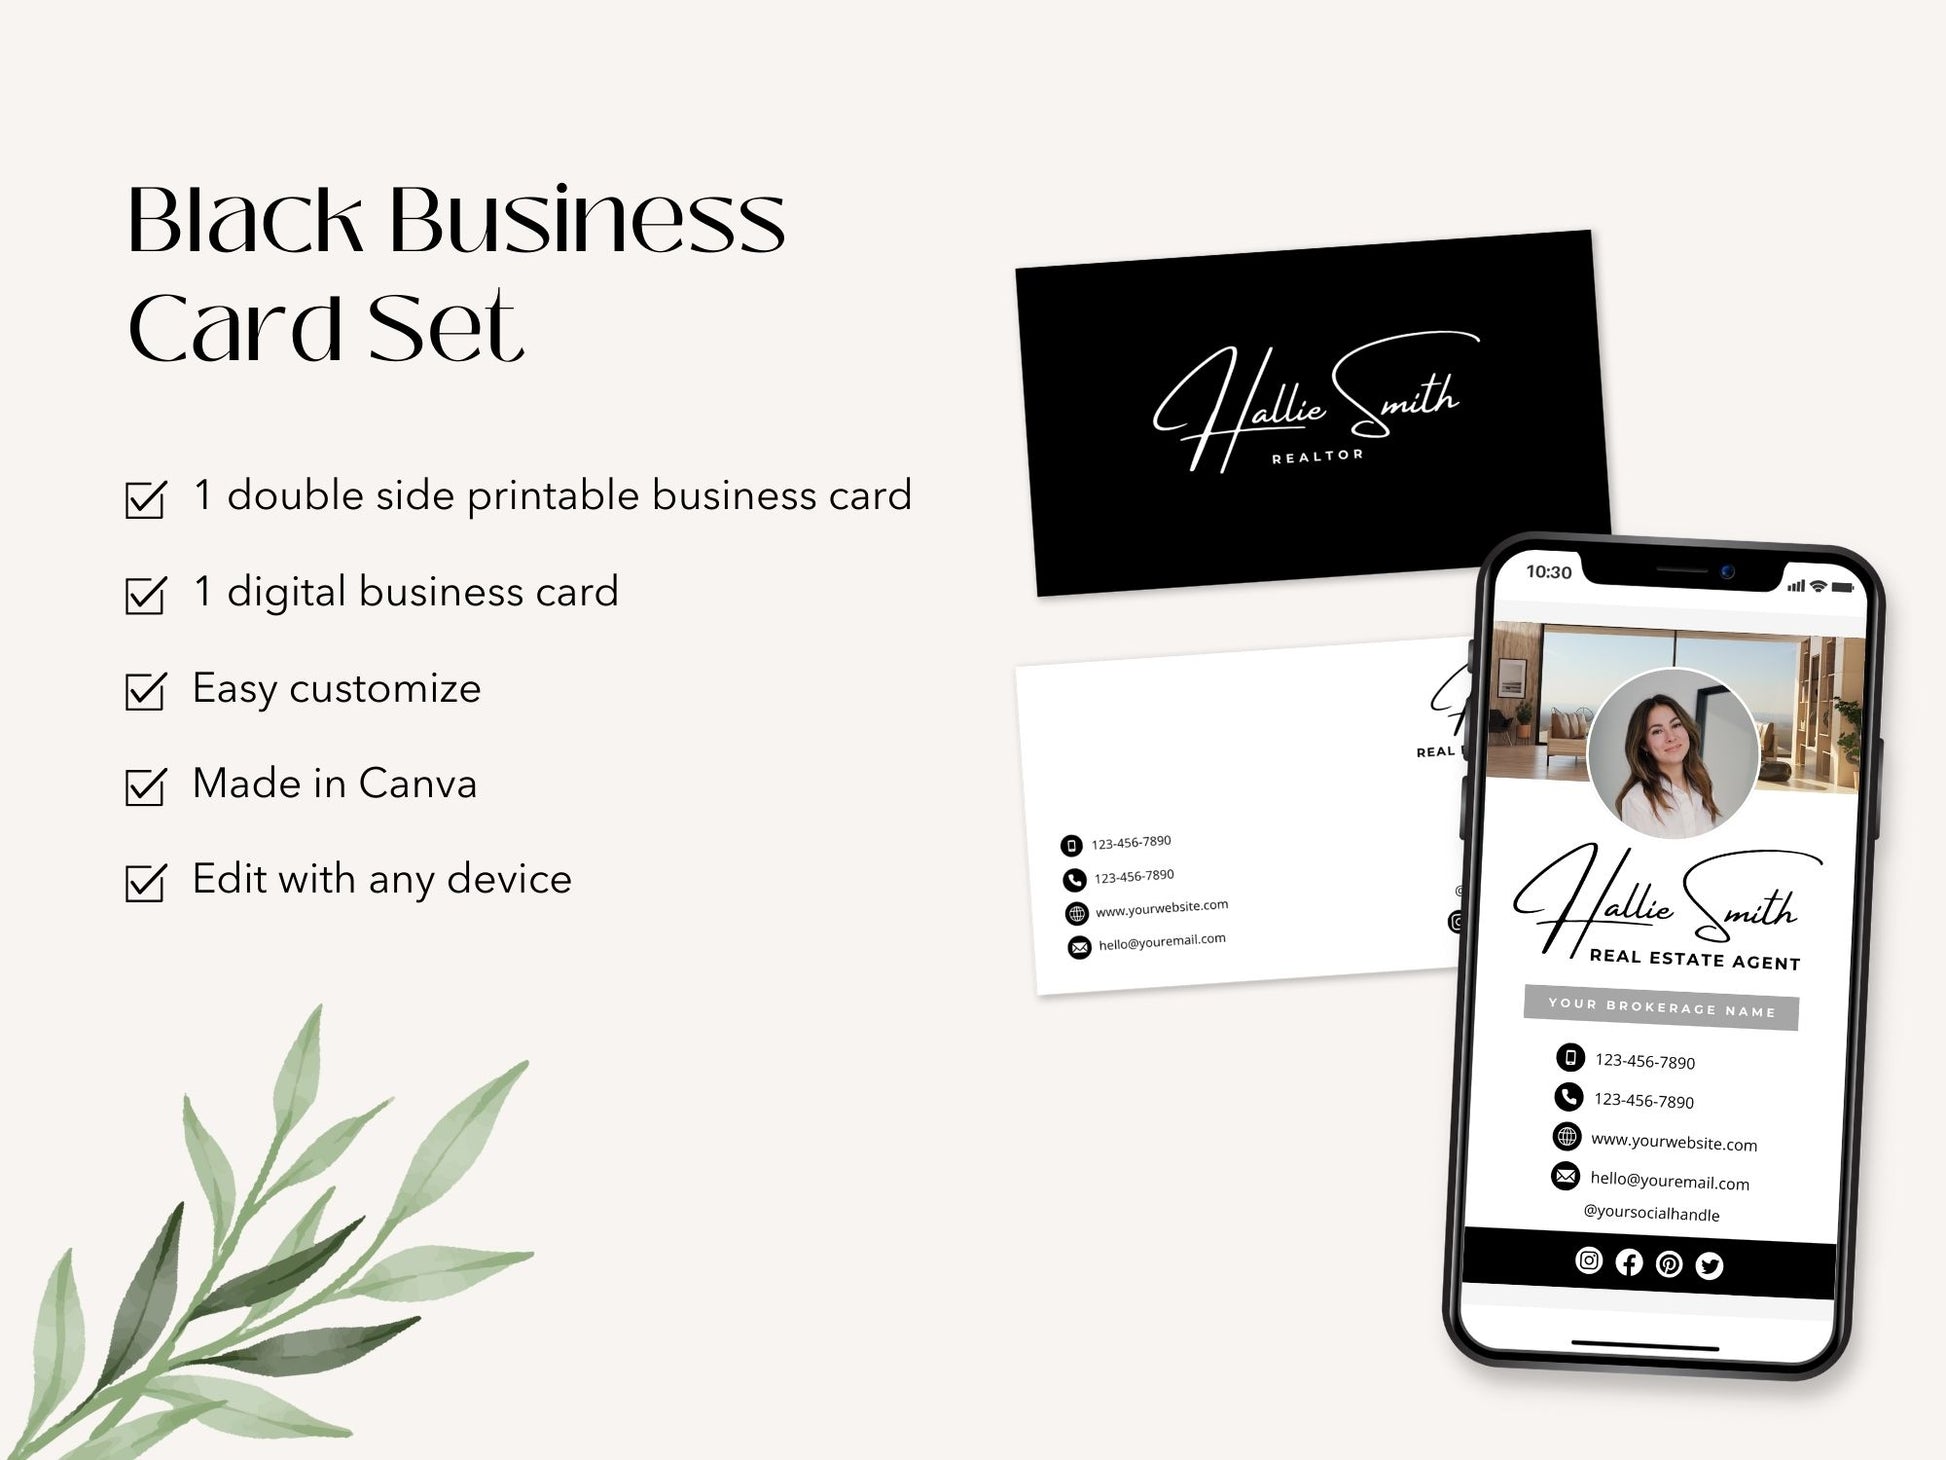 Real Estate Black Business Card Set - Sleek and sophisticated business cards in a classic black color scheme for real estate professionals.